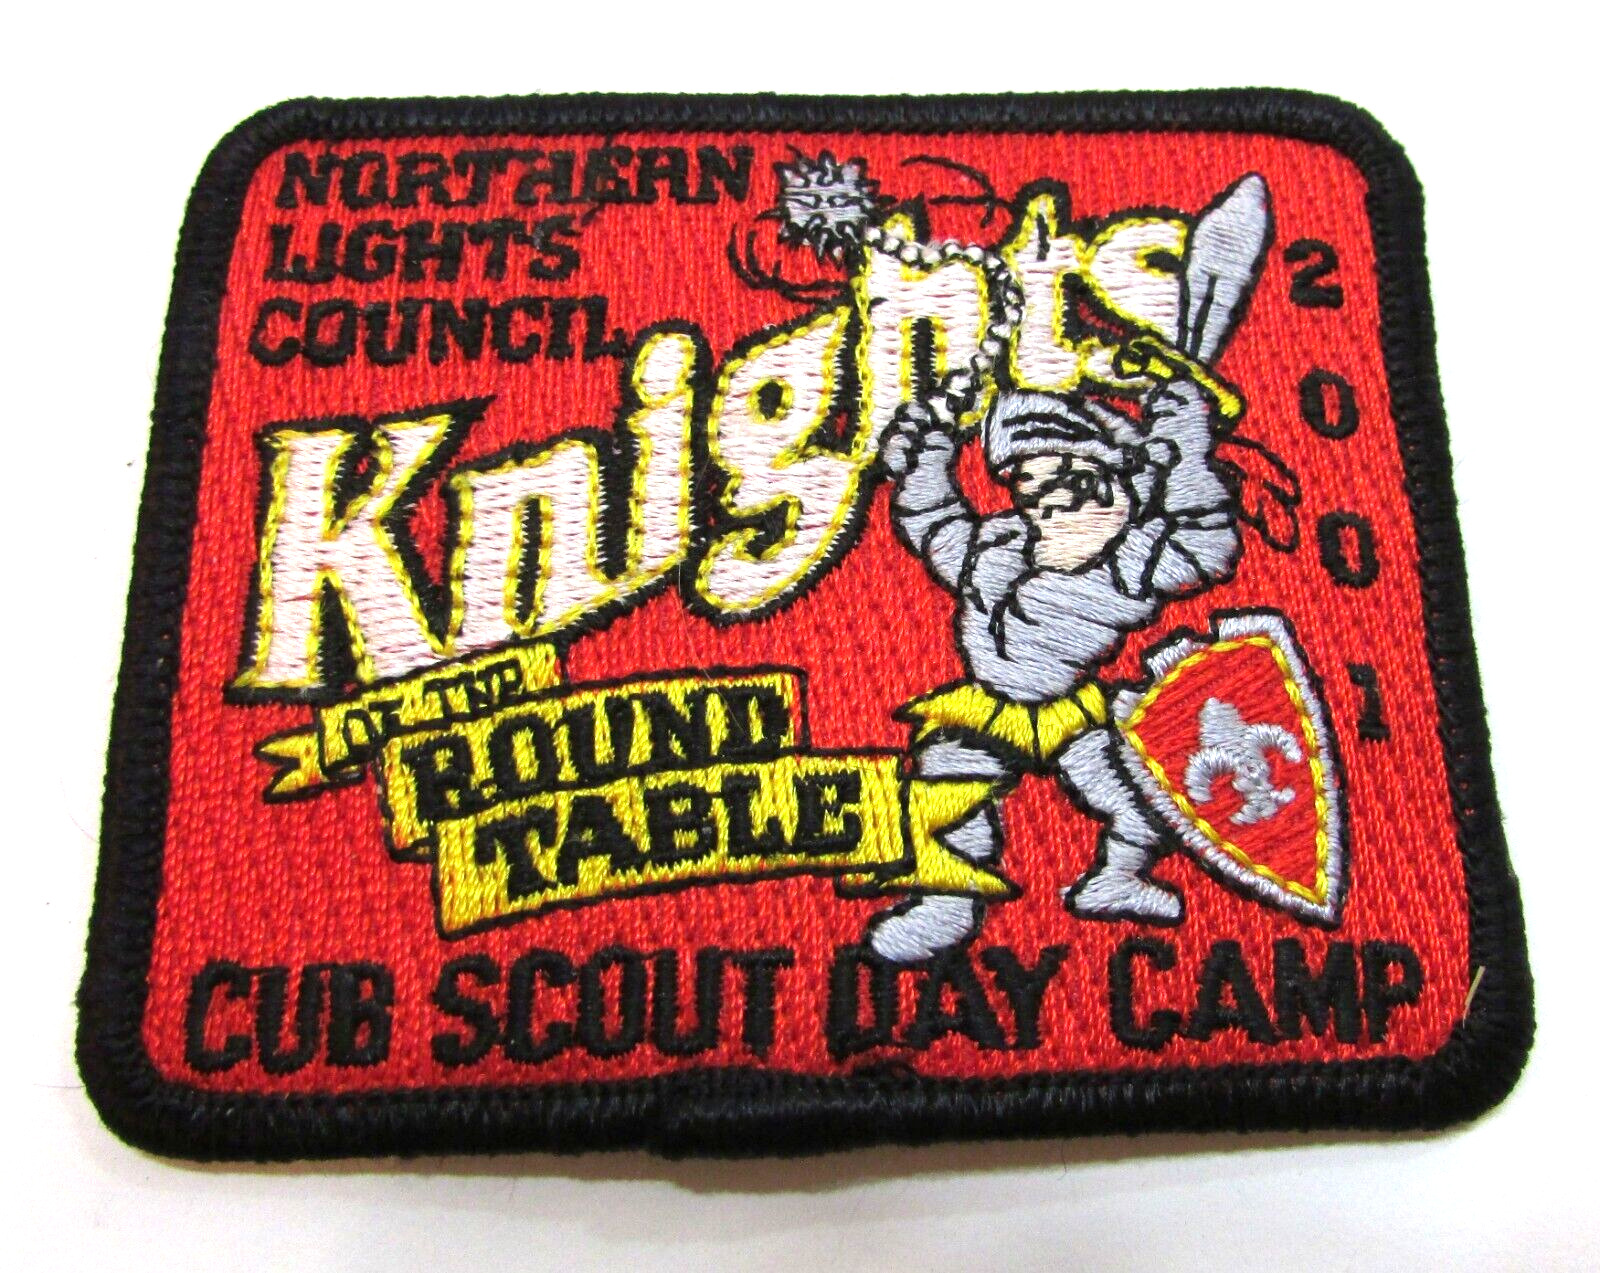 2001 Northern Lights Council Cub Scout Day Camp Knights of The Round Table Patch